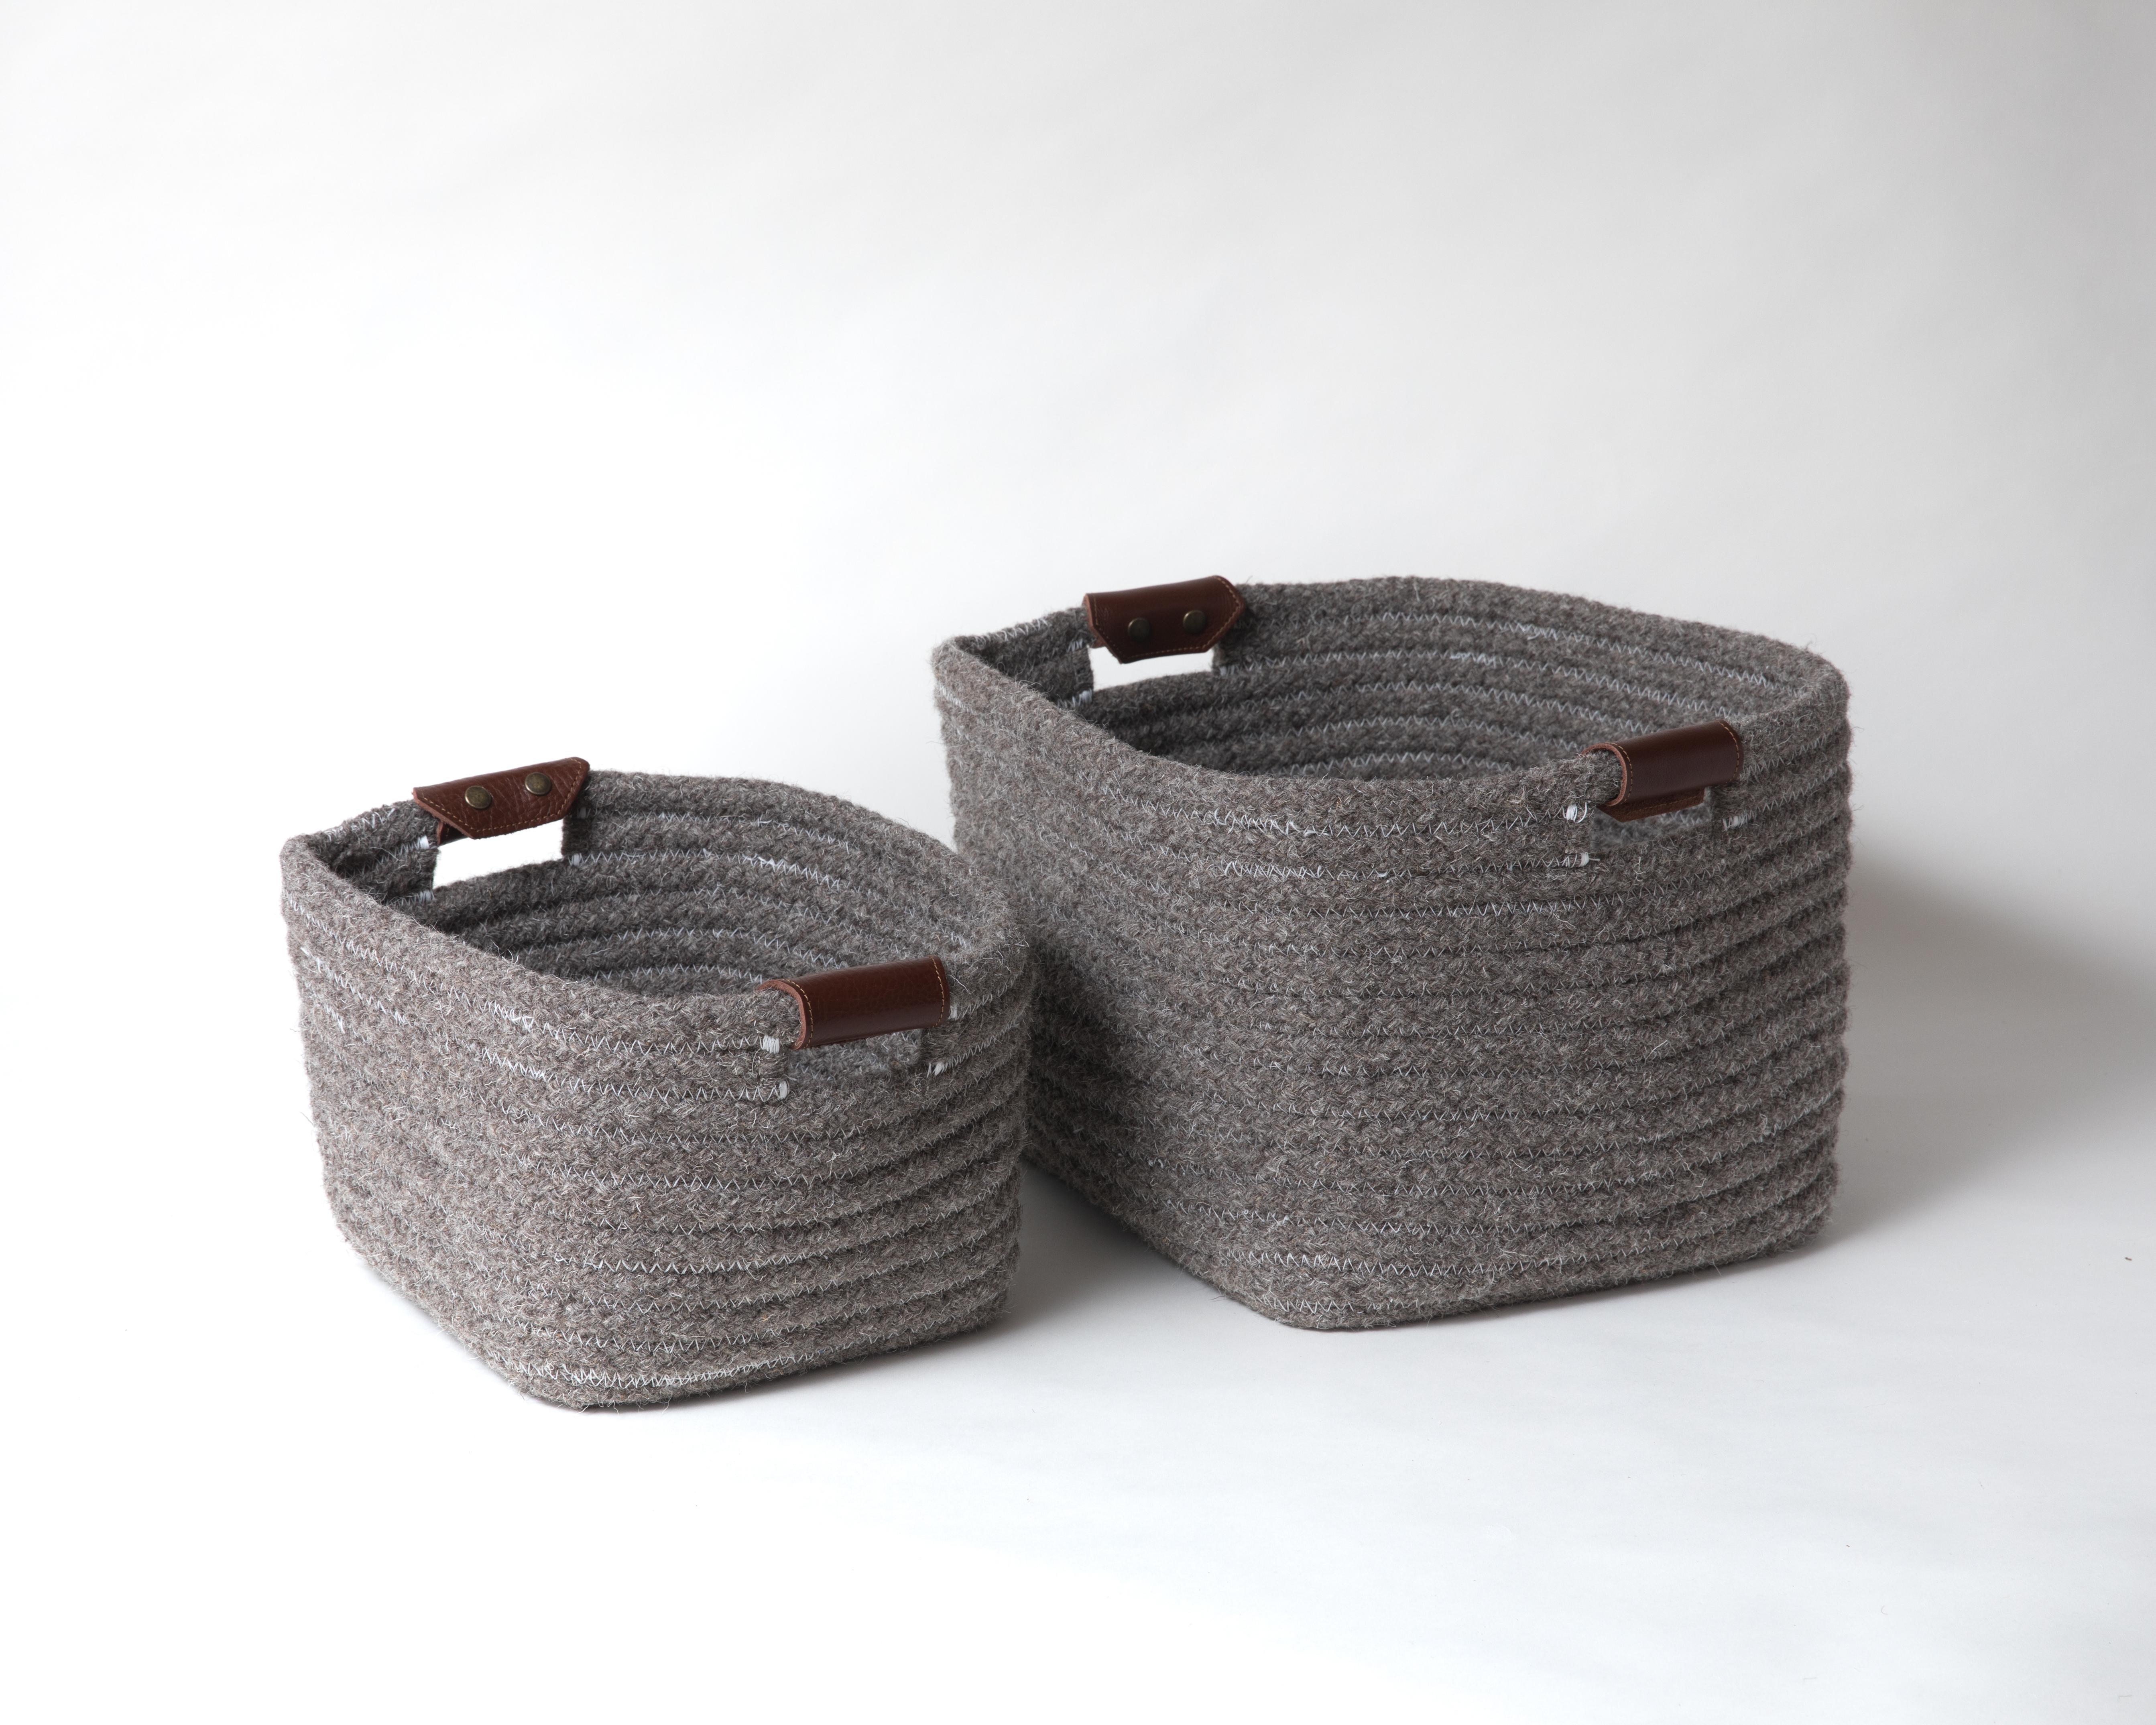 Simple and sturdy woven basket in a rectangular design. Dark Grey, natural un-dyed wool is accented with leather handles. Handle color options are brown, black and natural. 

Designed by Meredith Thayer in her South Boston studio and made to order